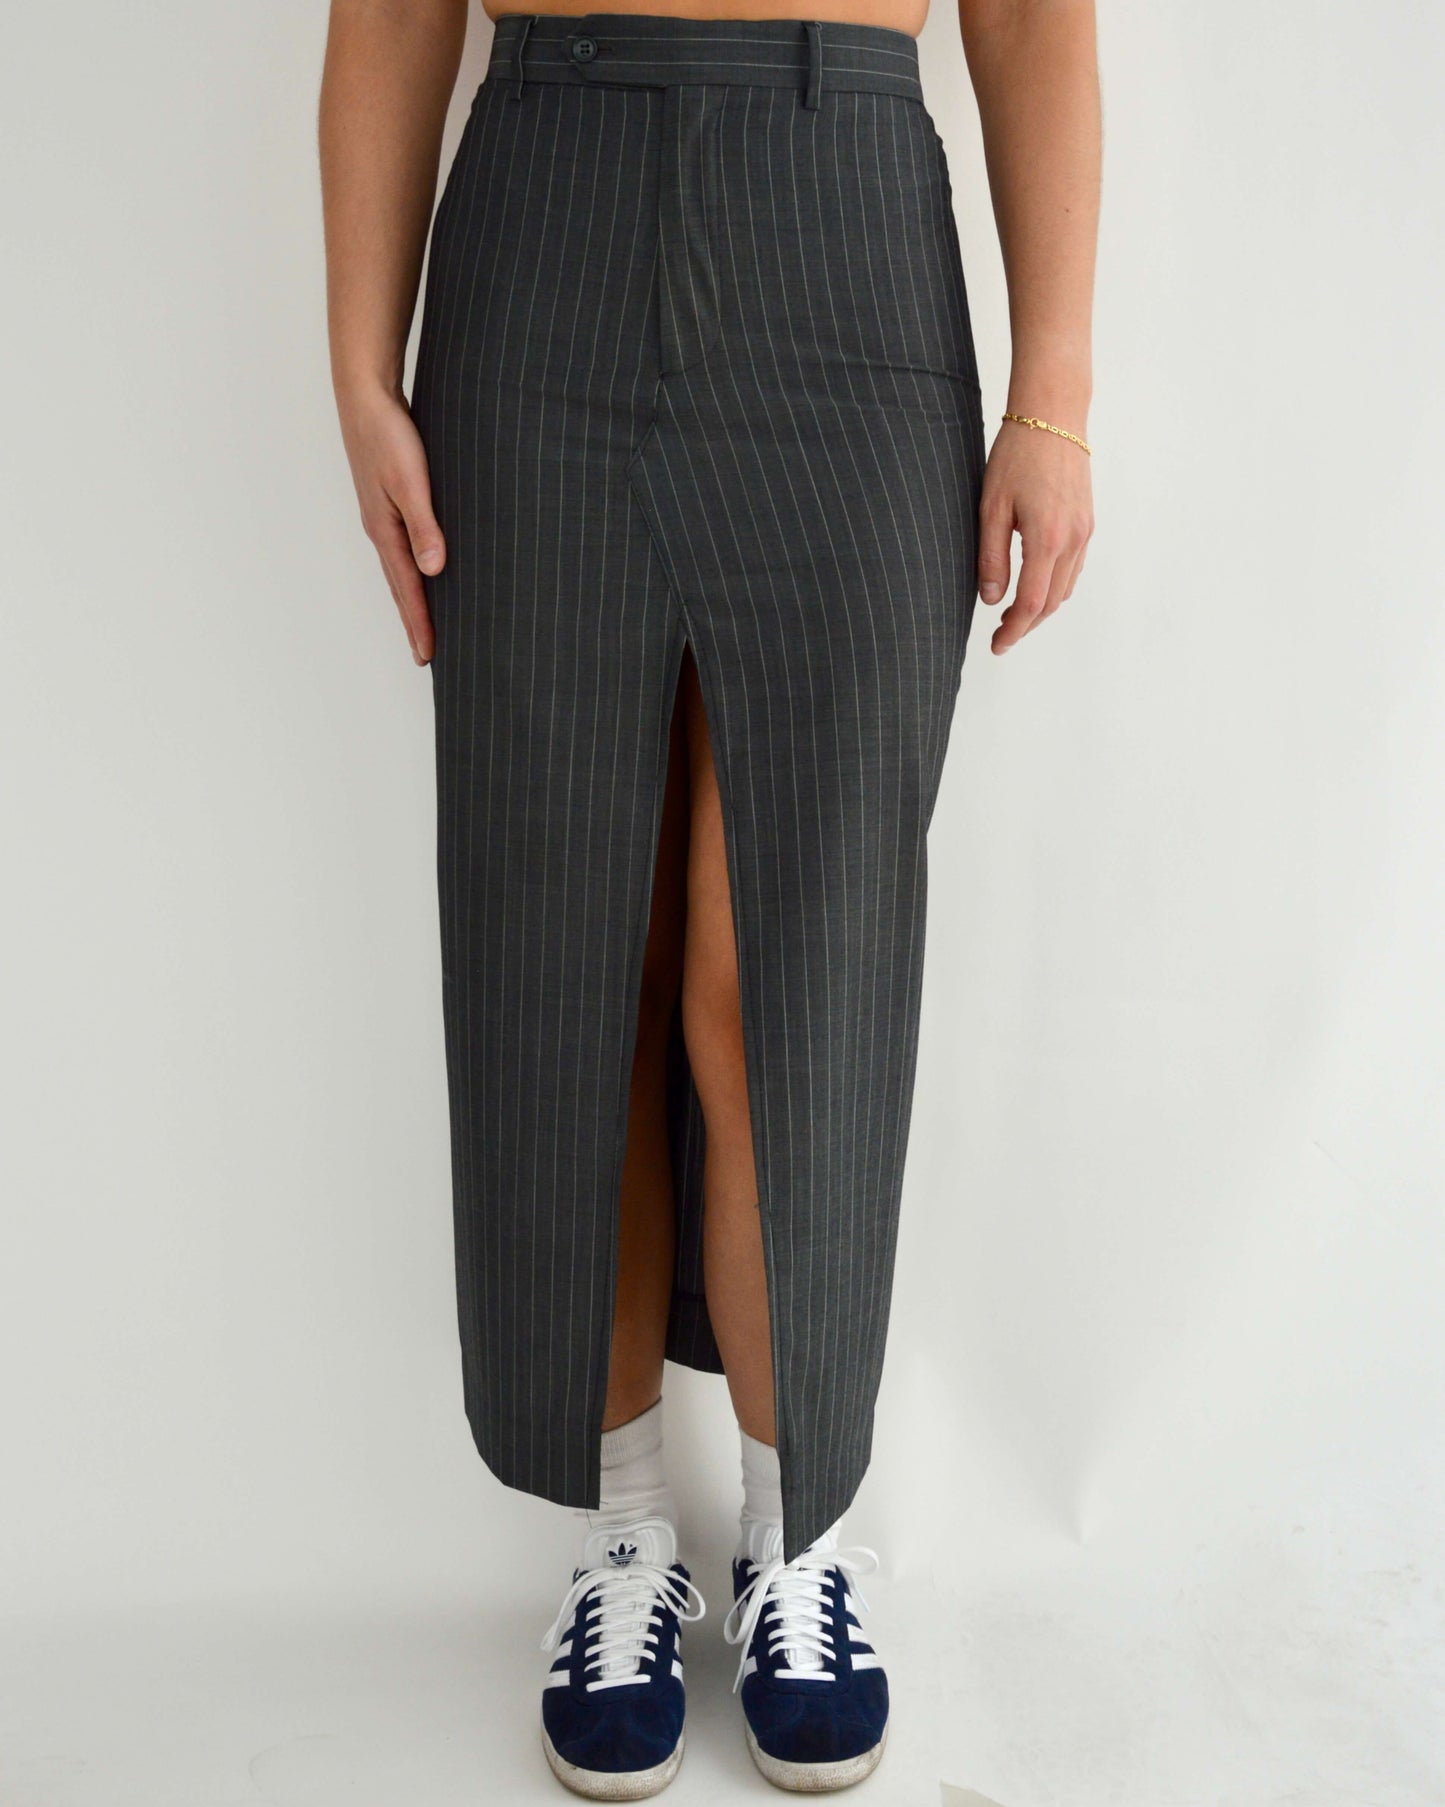 Long Skirt - Business Grey White Lines (XS/S)